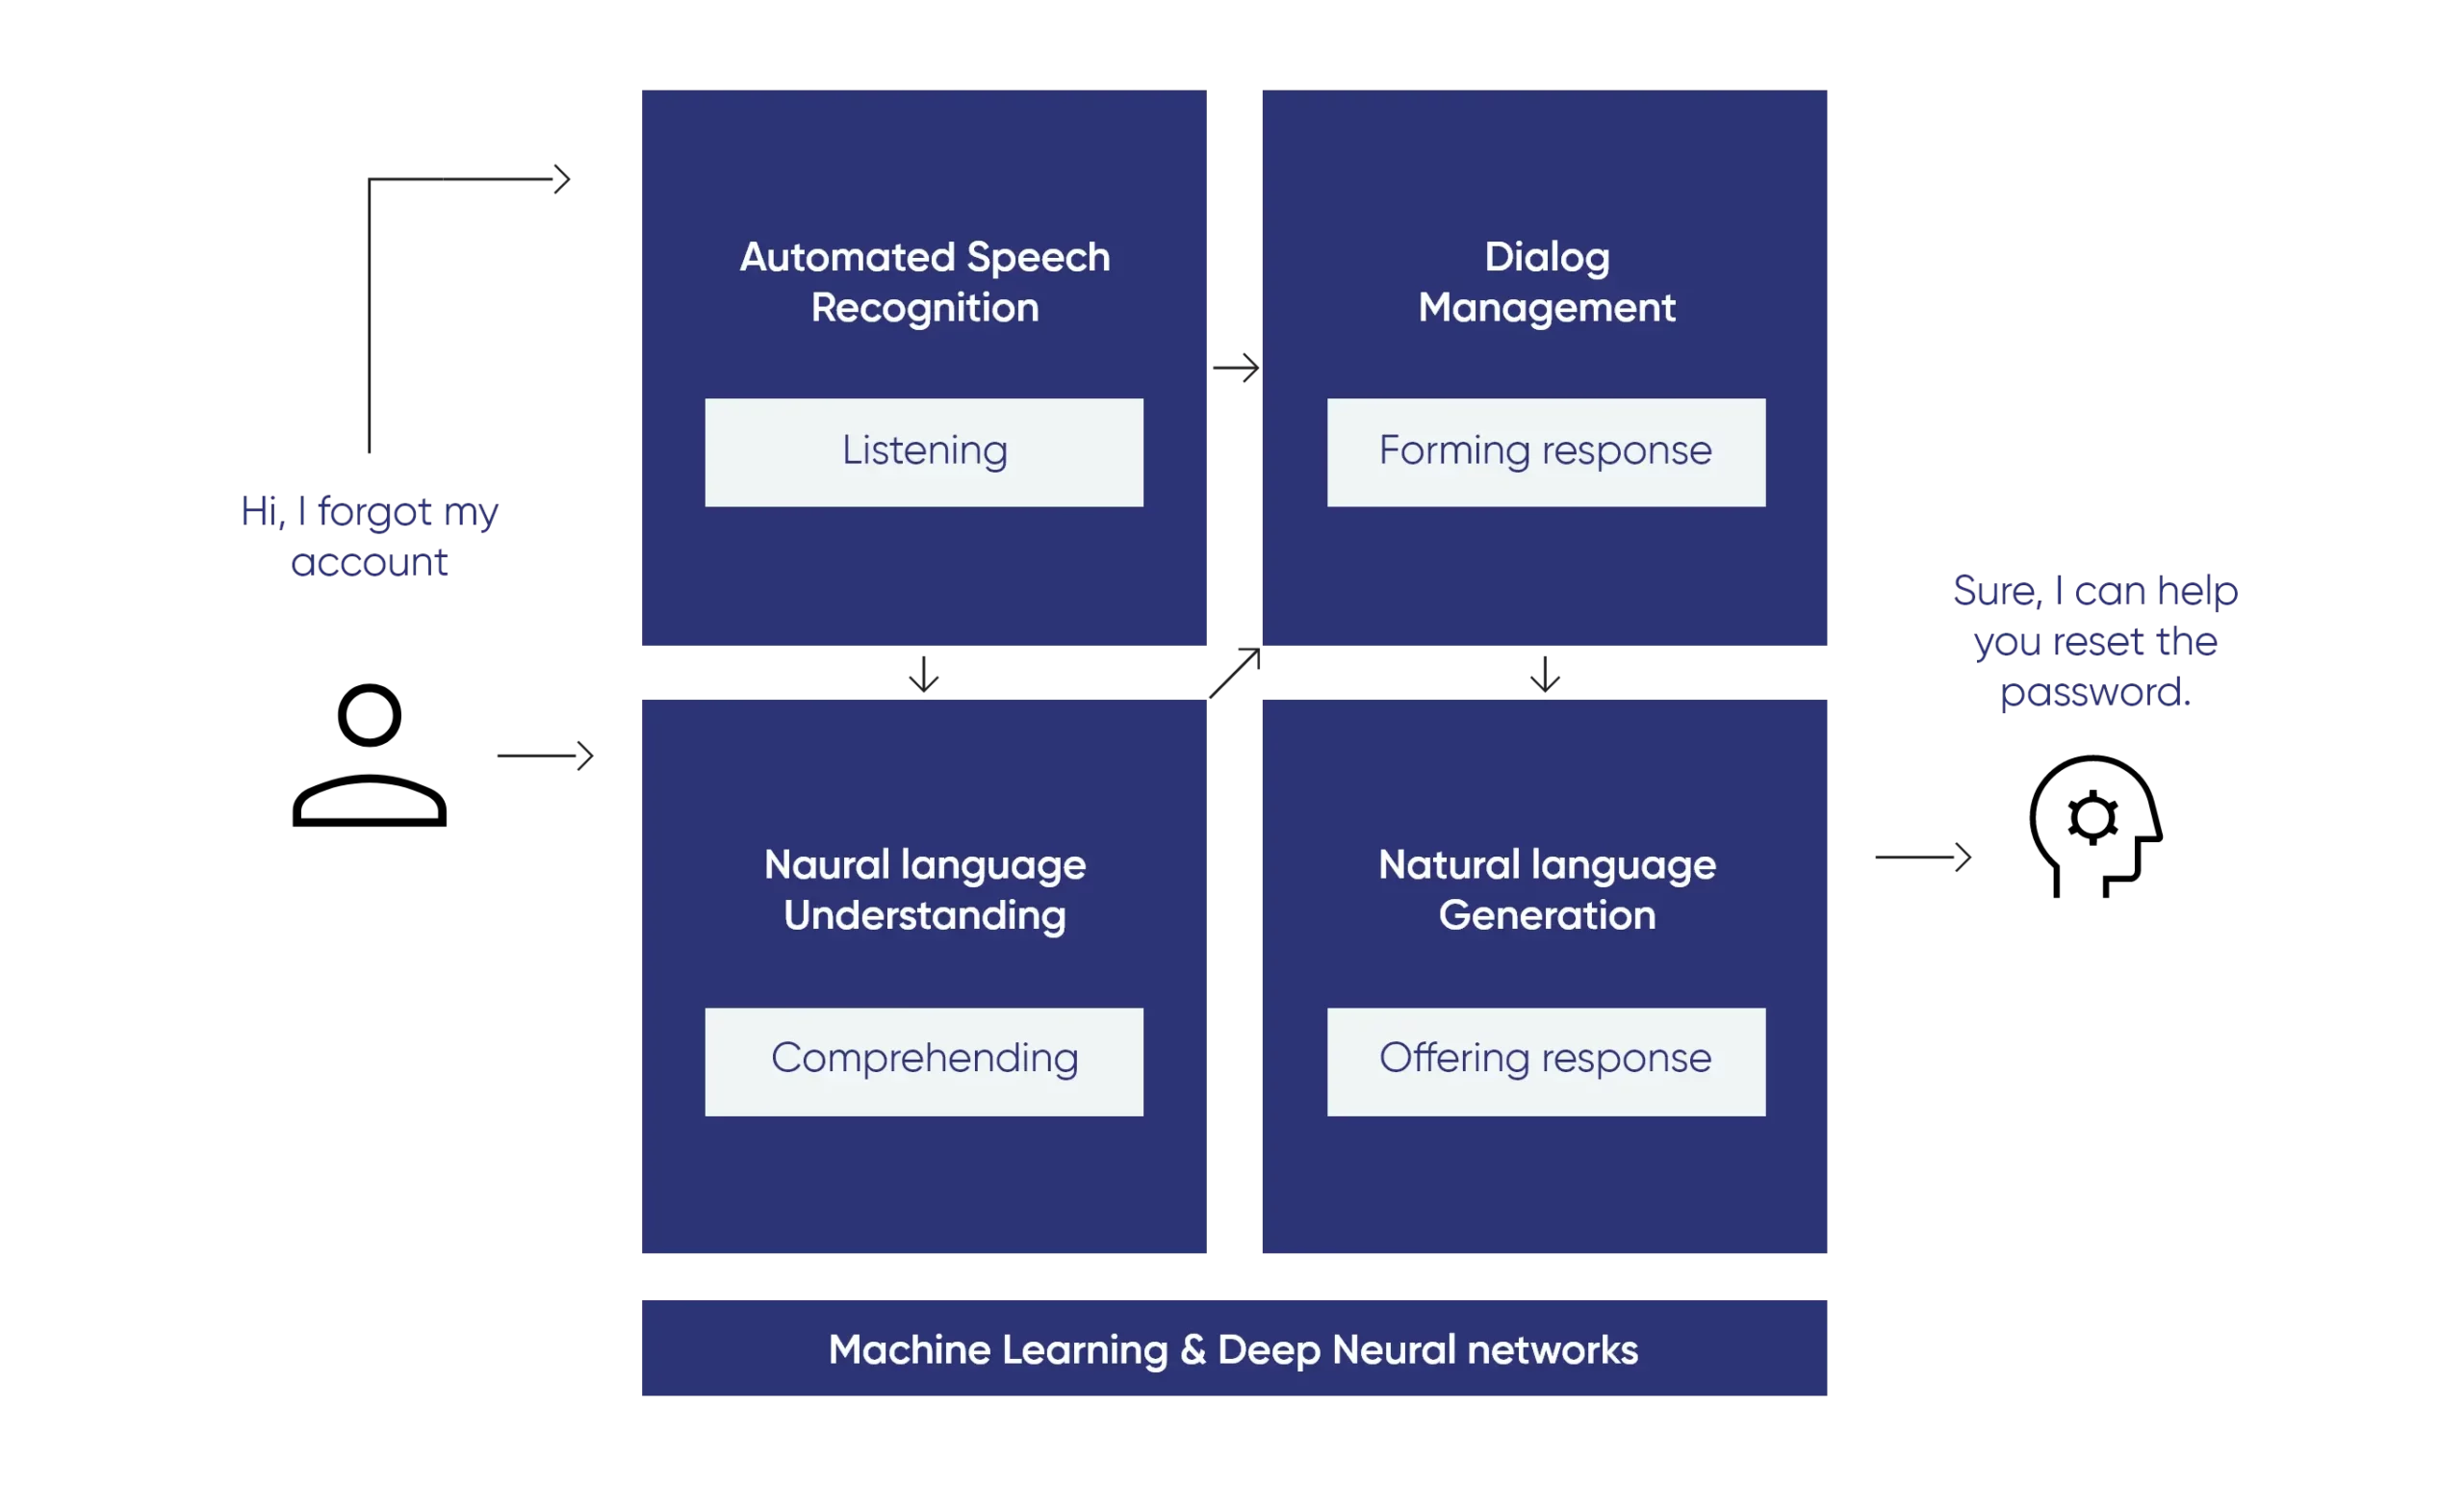 machine learning & deep neural networks